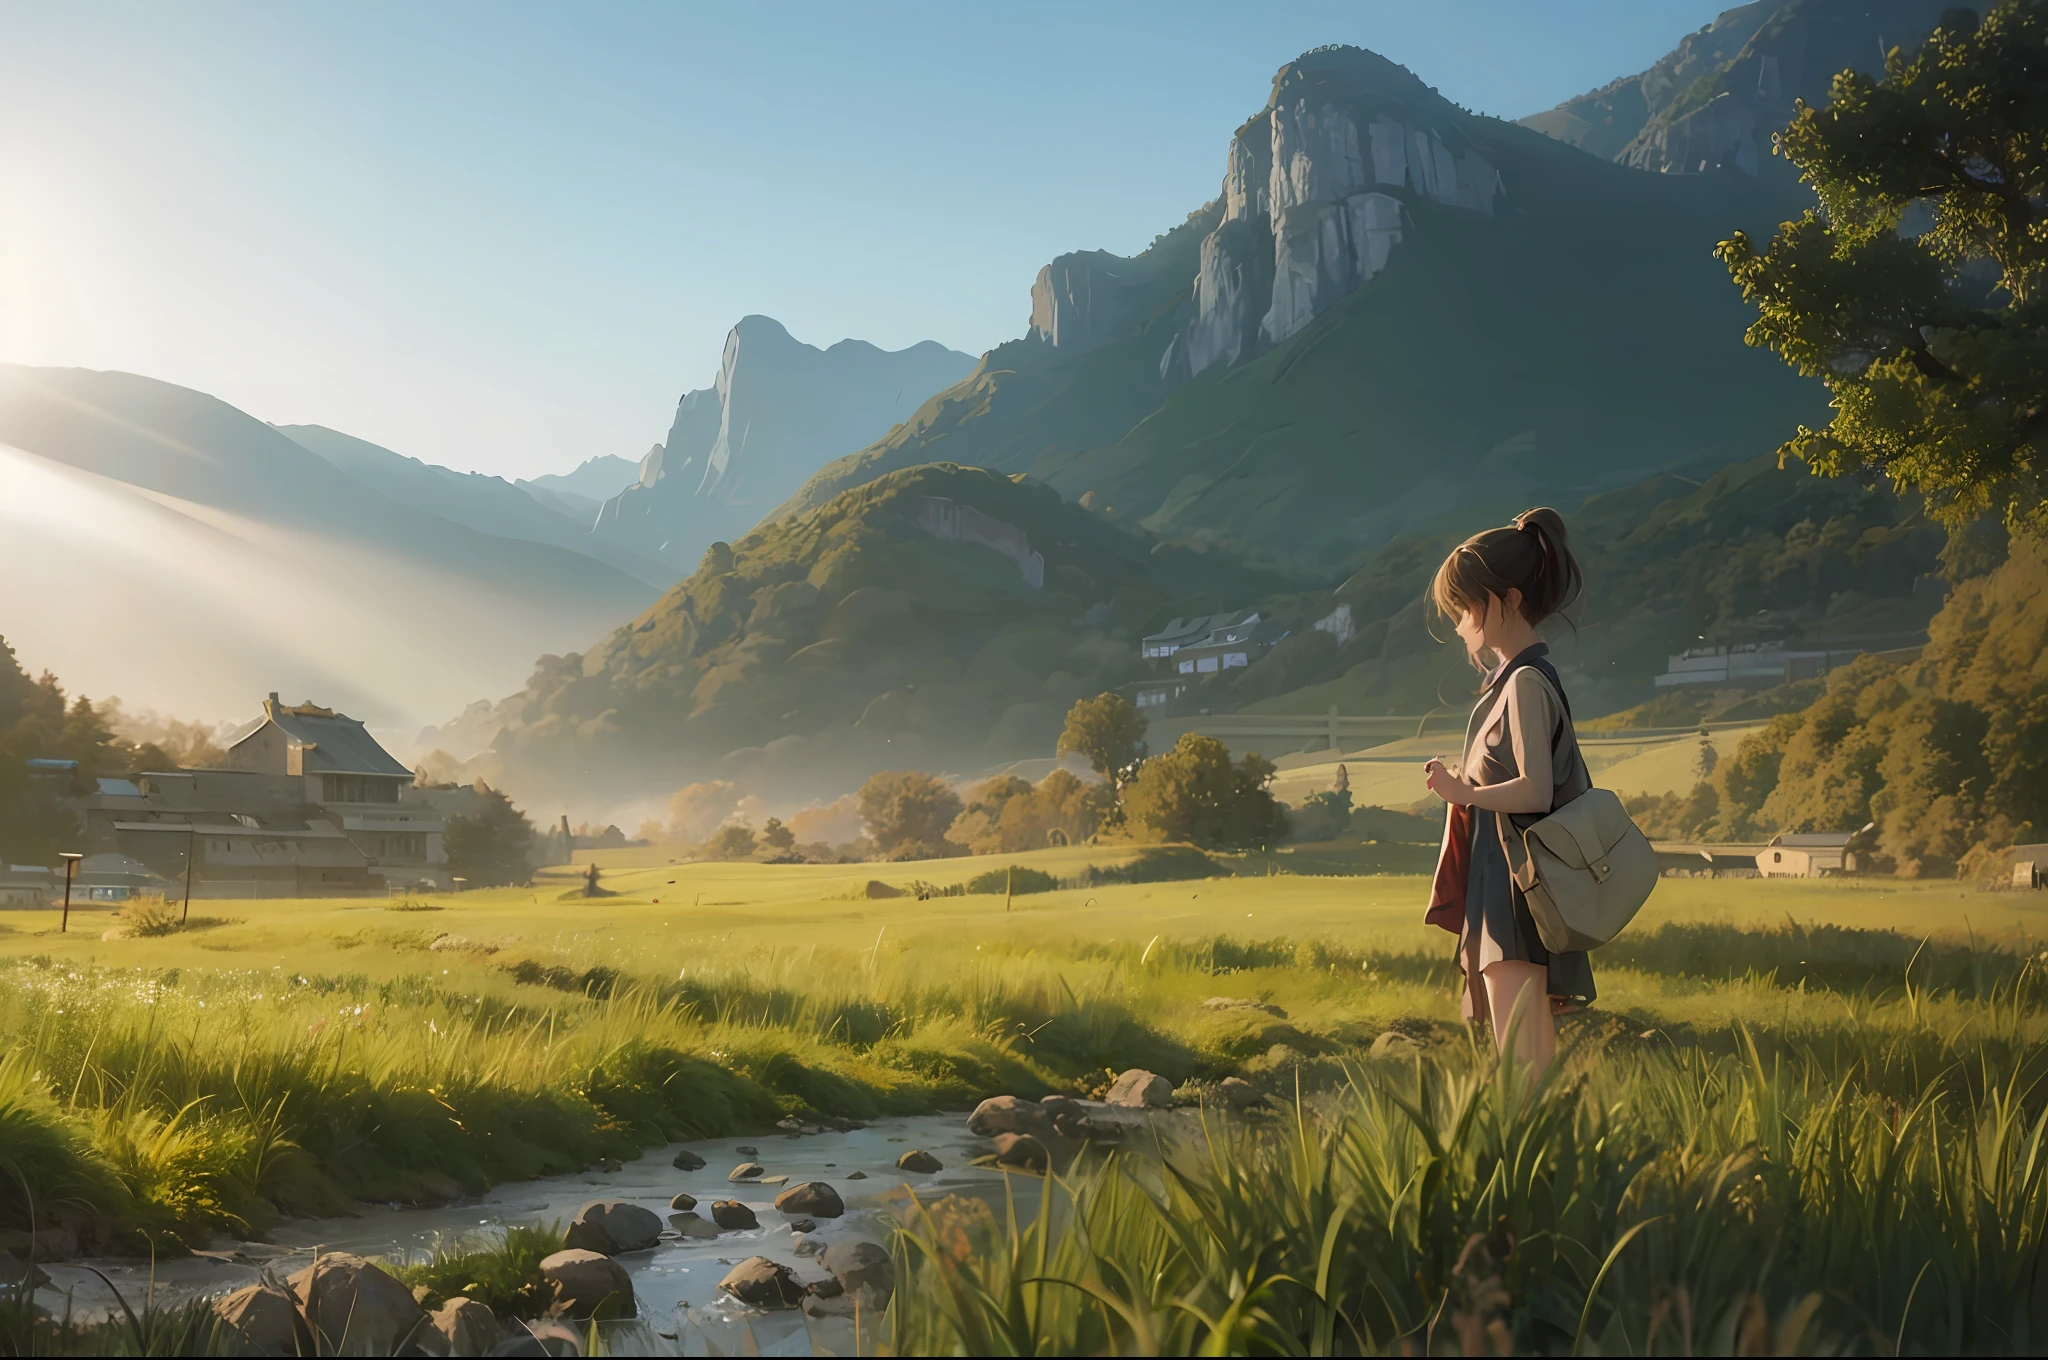 there is a girl standing in a field with a bag, girl walking on mountain, girl standing on mountain, girl walking in a canyon, lost in a dreamy fairy landscape, looking at the mountains, cinematic morning light, girl walking on cliff, girl standing on side river, panoramic view of girl, beautiful environment face details